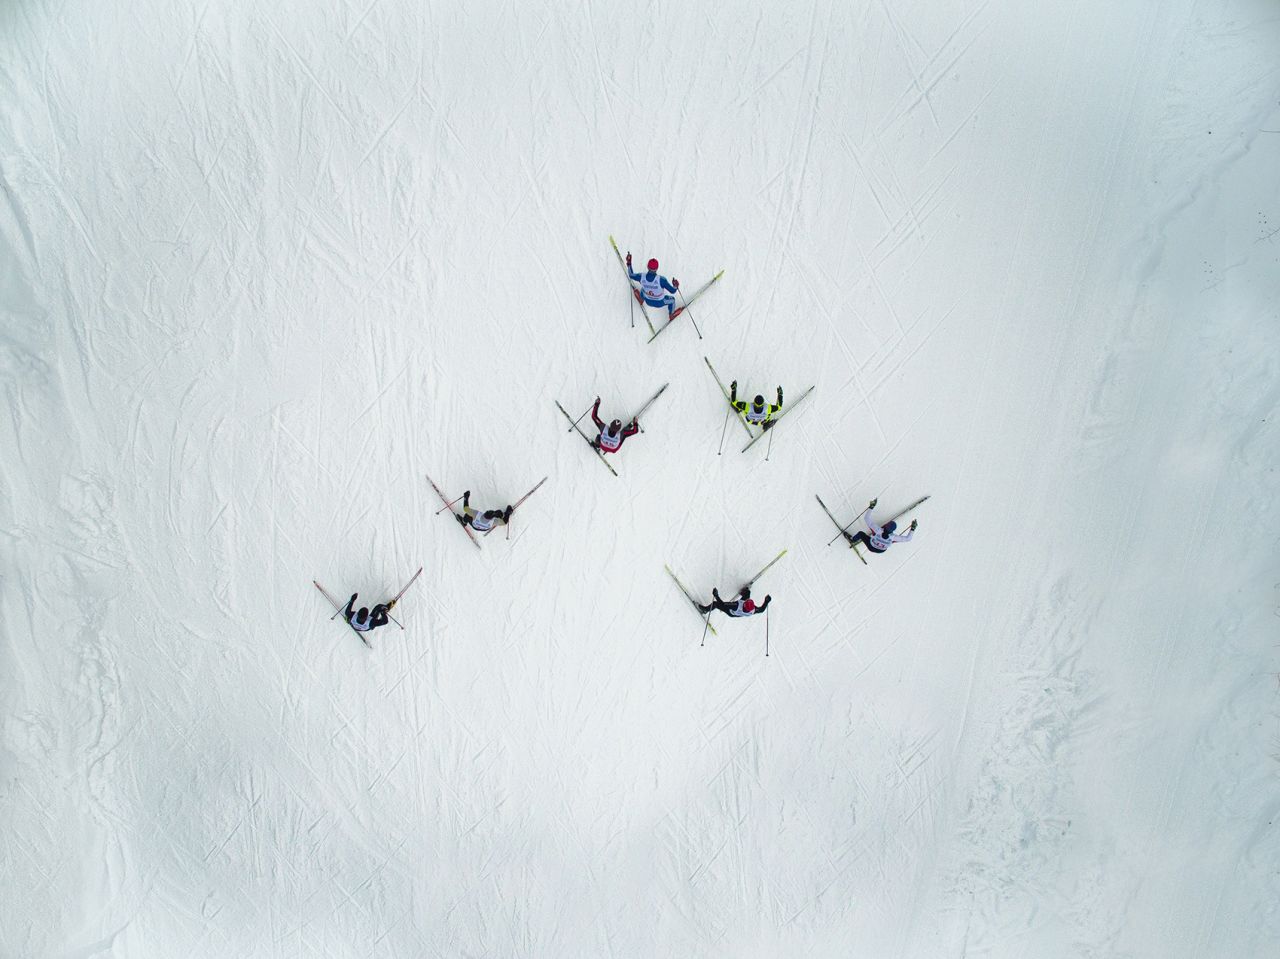 <strong>Ski race: </strong>This photo by Maksim Tarasov shows skiers crossing the snows of Adzhigardak mountain, near the the town of Asha in the Urals.